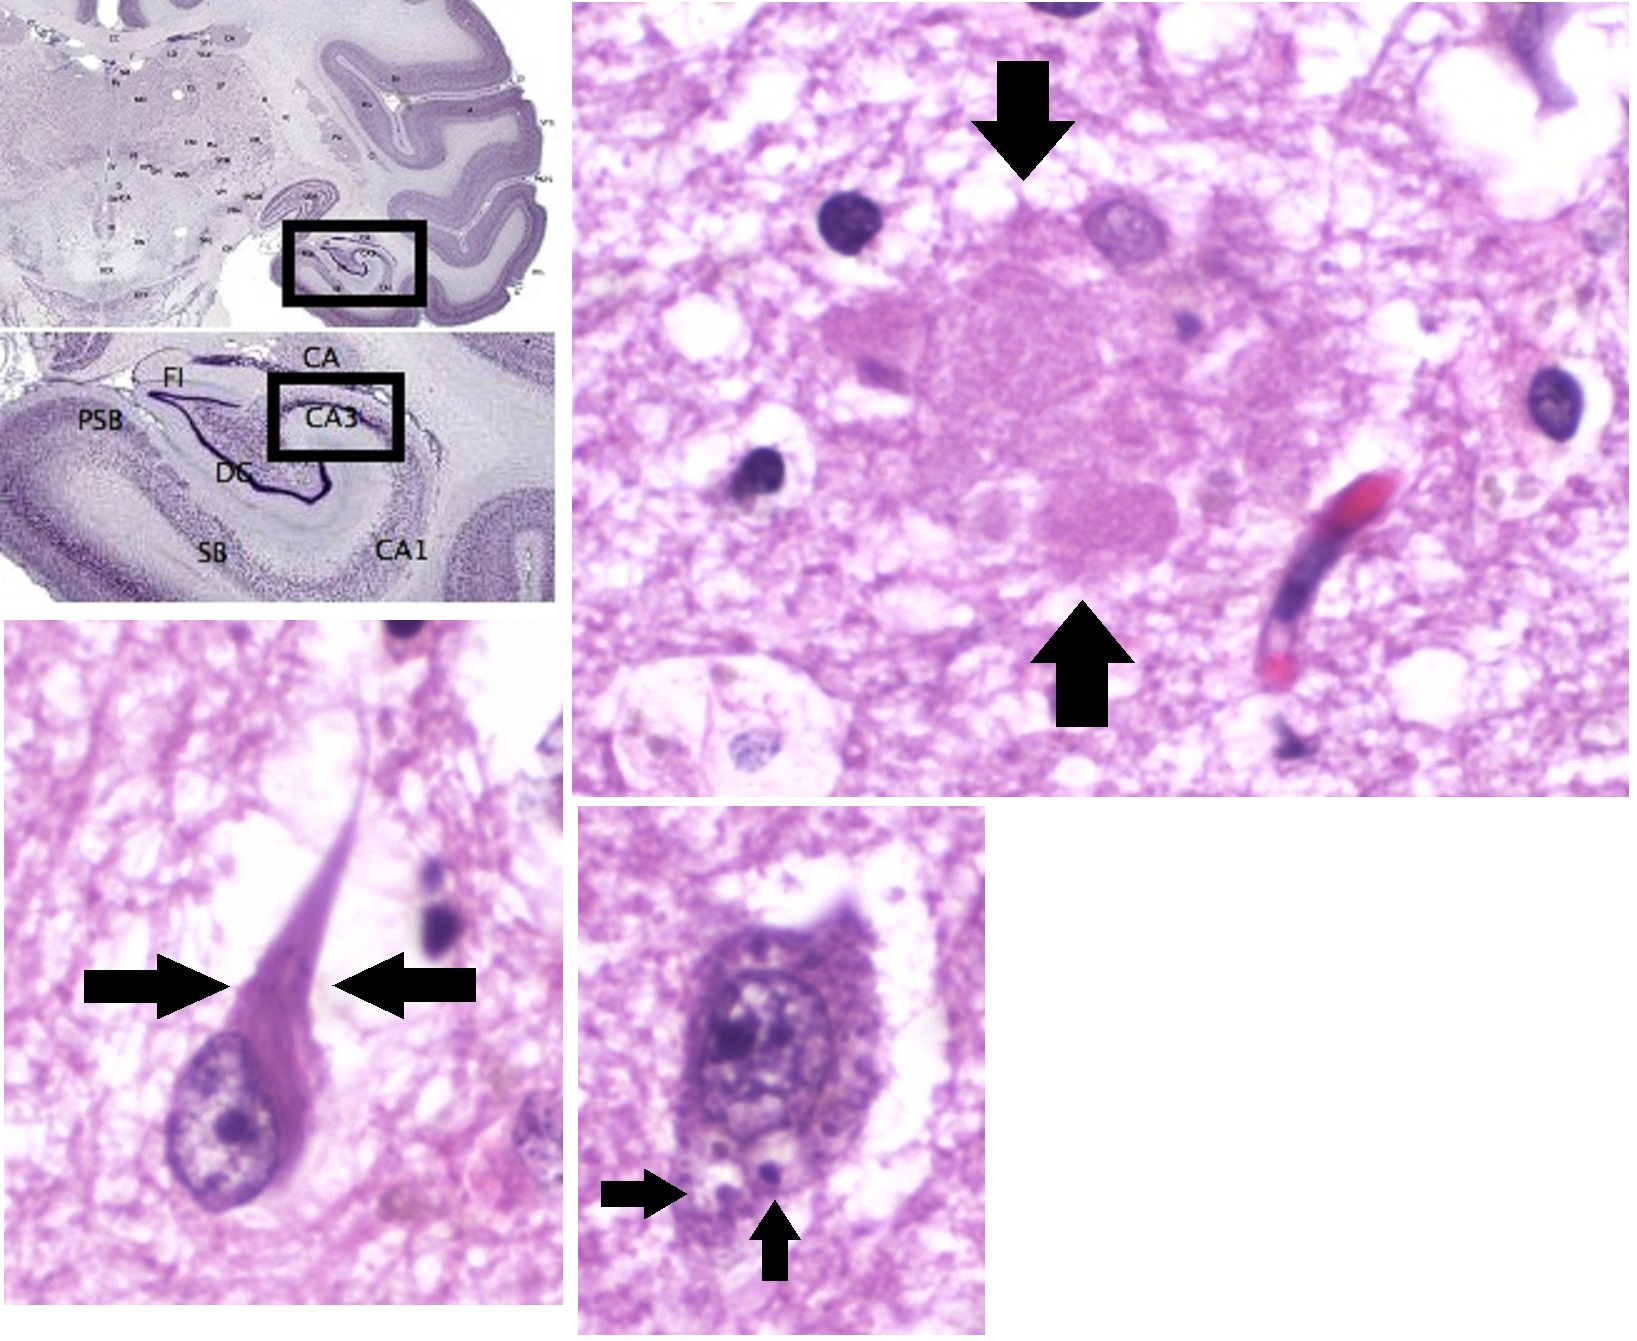 Histopathologic images of Alzheimer’s disease, in the CA3 area of the hippocampus, showing an amyloid plaque (top right), neurofibrillary tangles (bottom left) and granulovacuolar degeneration (bottom center).